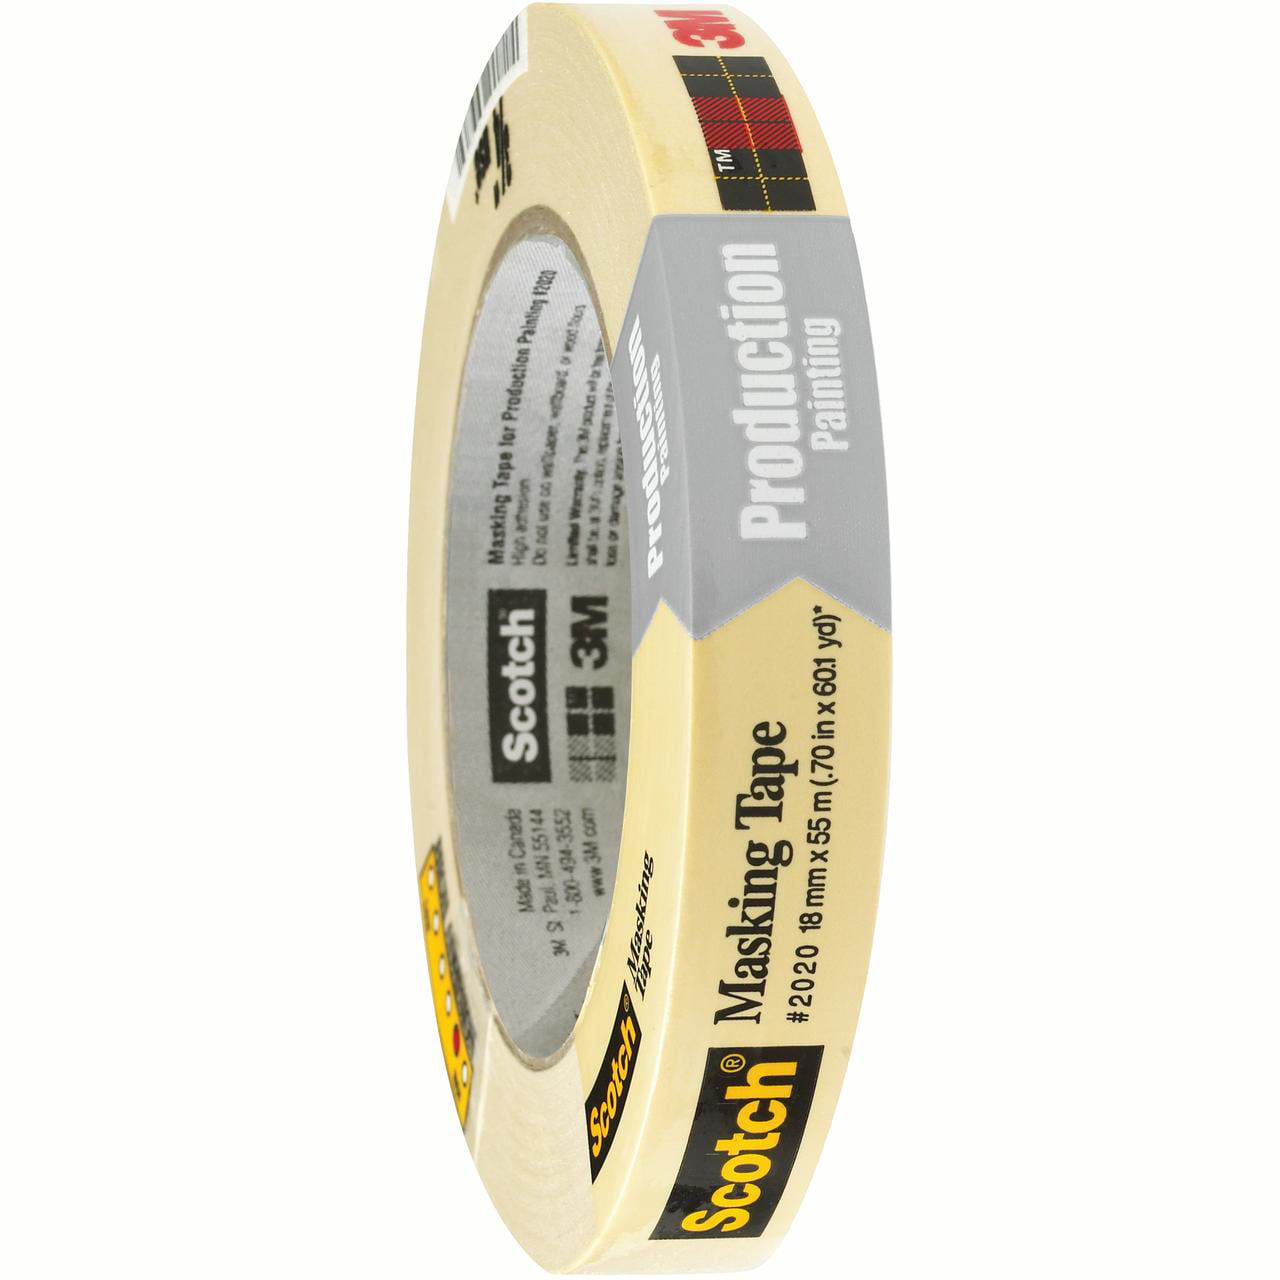 Scotch T9342020 0.75 In. X 60 Yards 2020 Masking Tape, Natural - Case Of 48